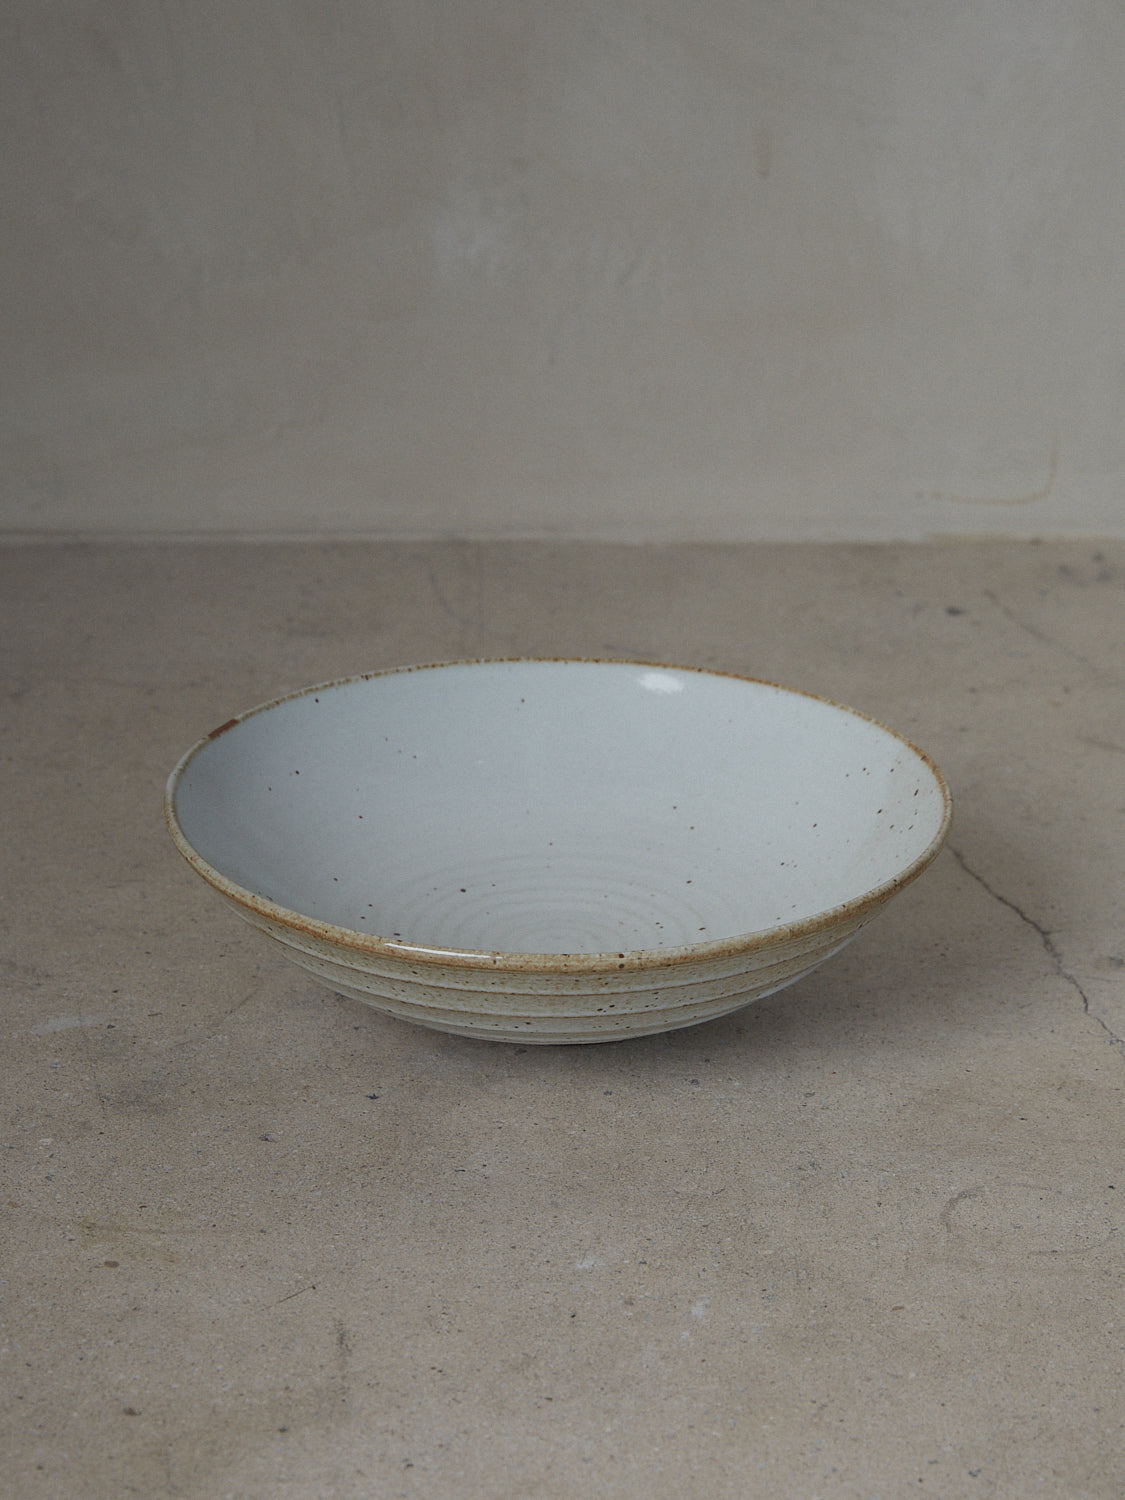 Wide Shinogi Bowl. Limited edition. One-of-a-kind, hand-thrown, footed stoneware bowl with horizontal Japanese Shinogi style ridge pattern on exterior in a creamy white speckle finish. 